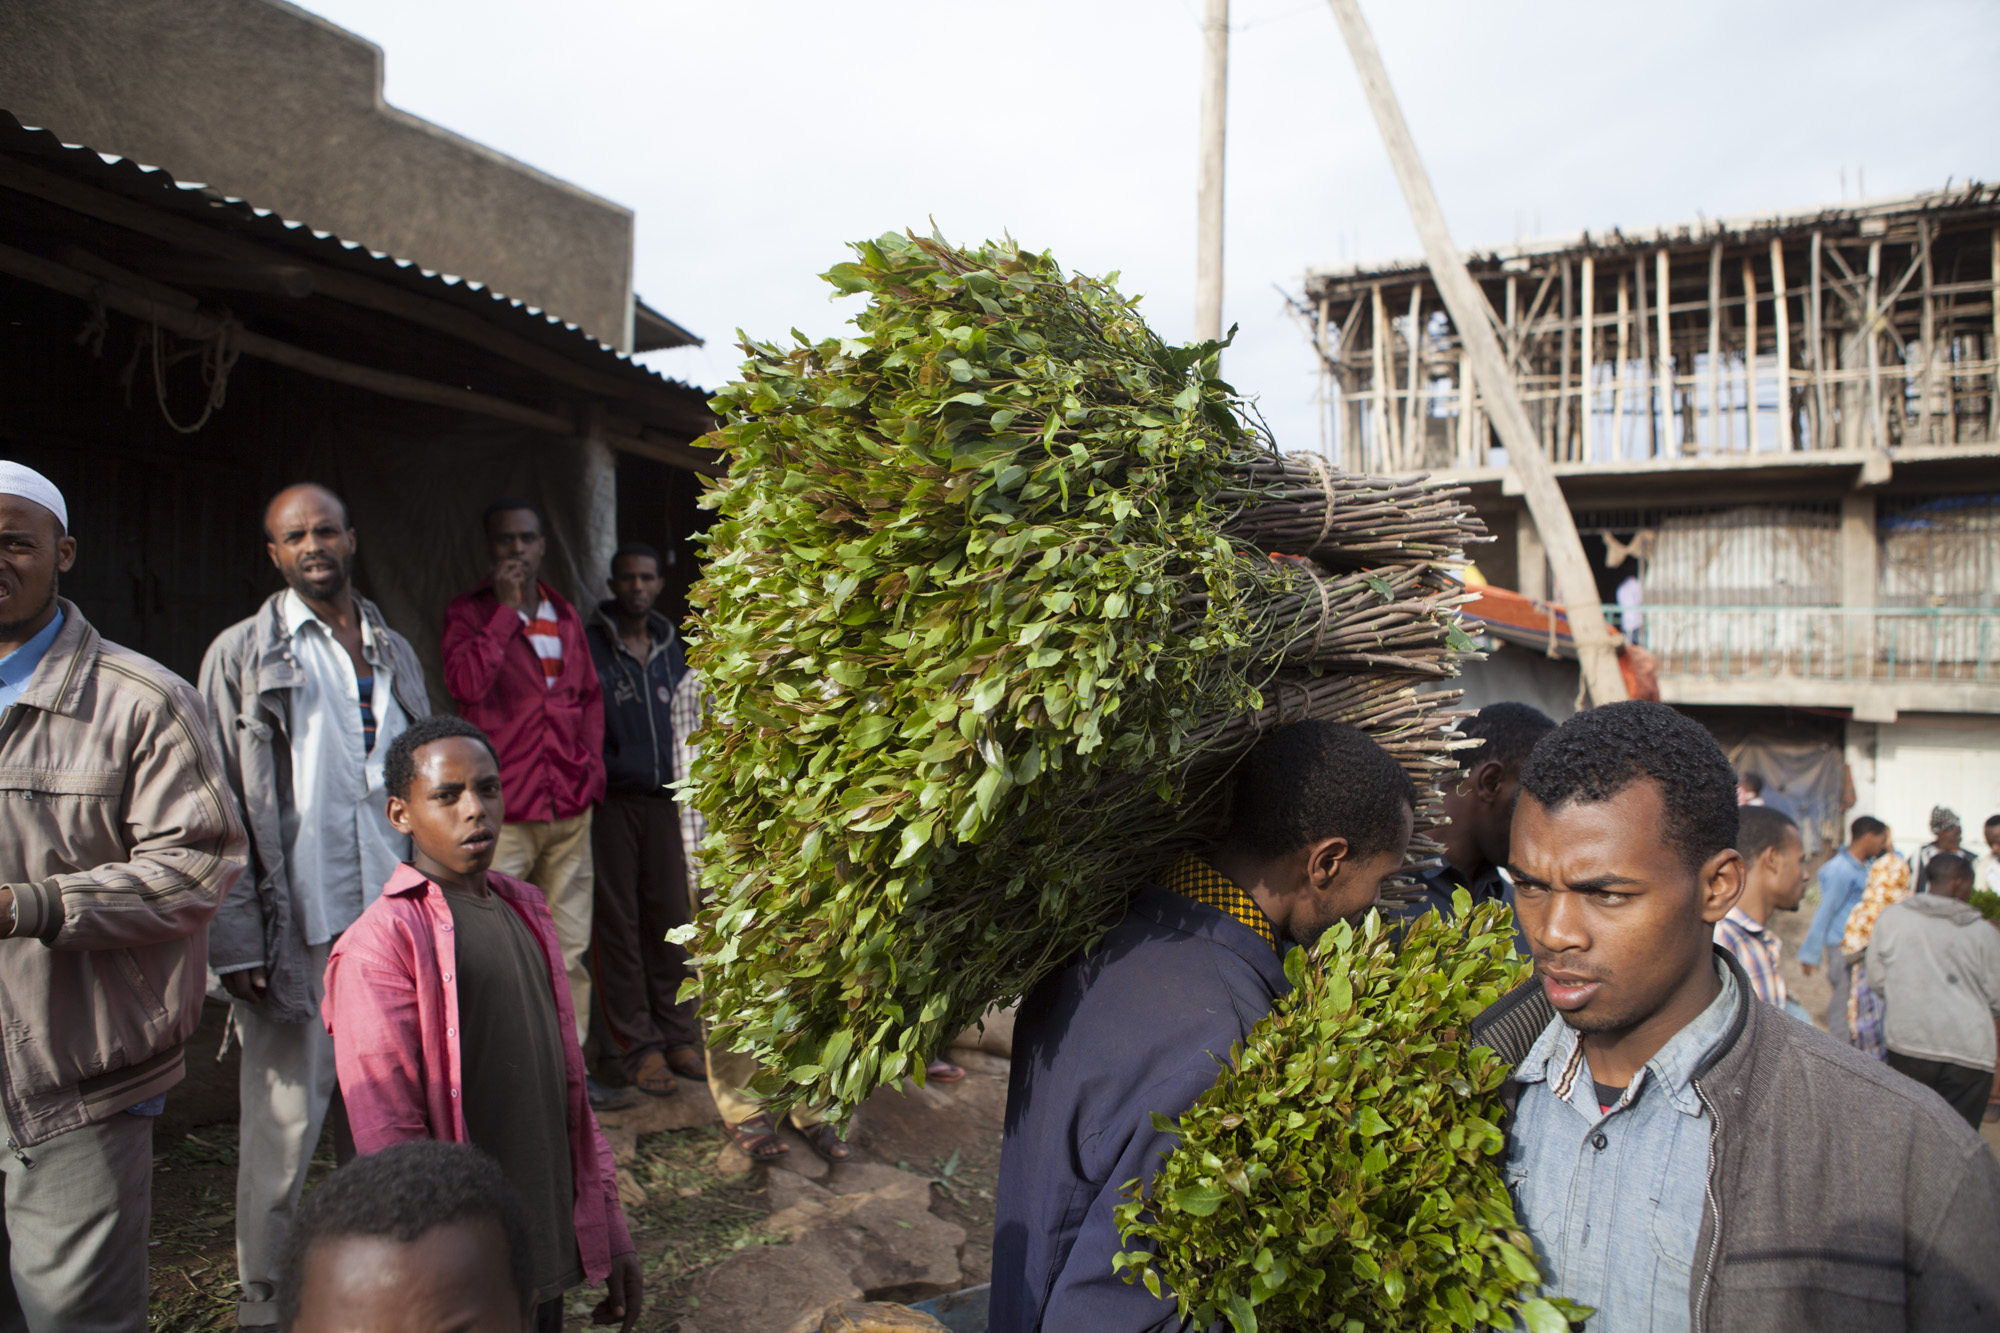  Men are pictured carrying fresh cut chat for sale in a market in Awaday, Ethiopia on 30 July 2014. Chat is the fourth largest export in Ethiopia, earning of $270 million USD annually.&nbsp; 